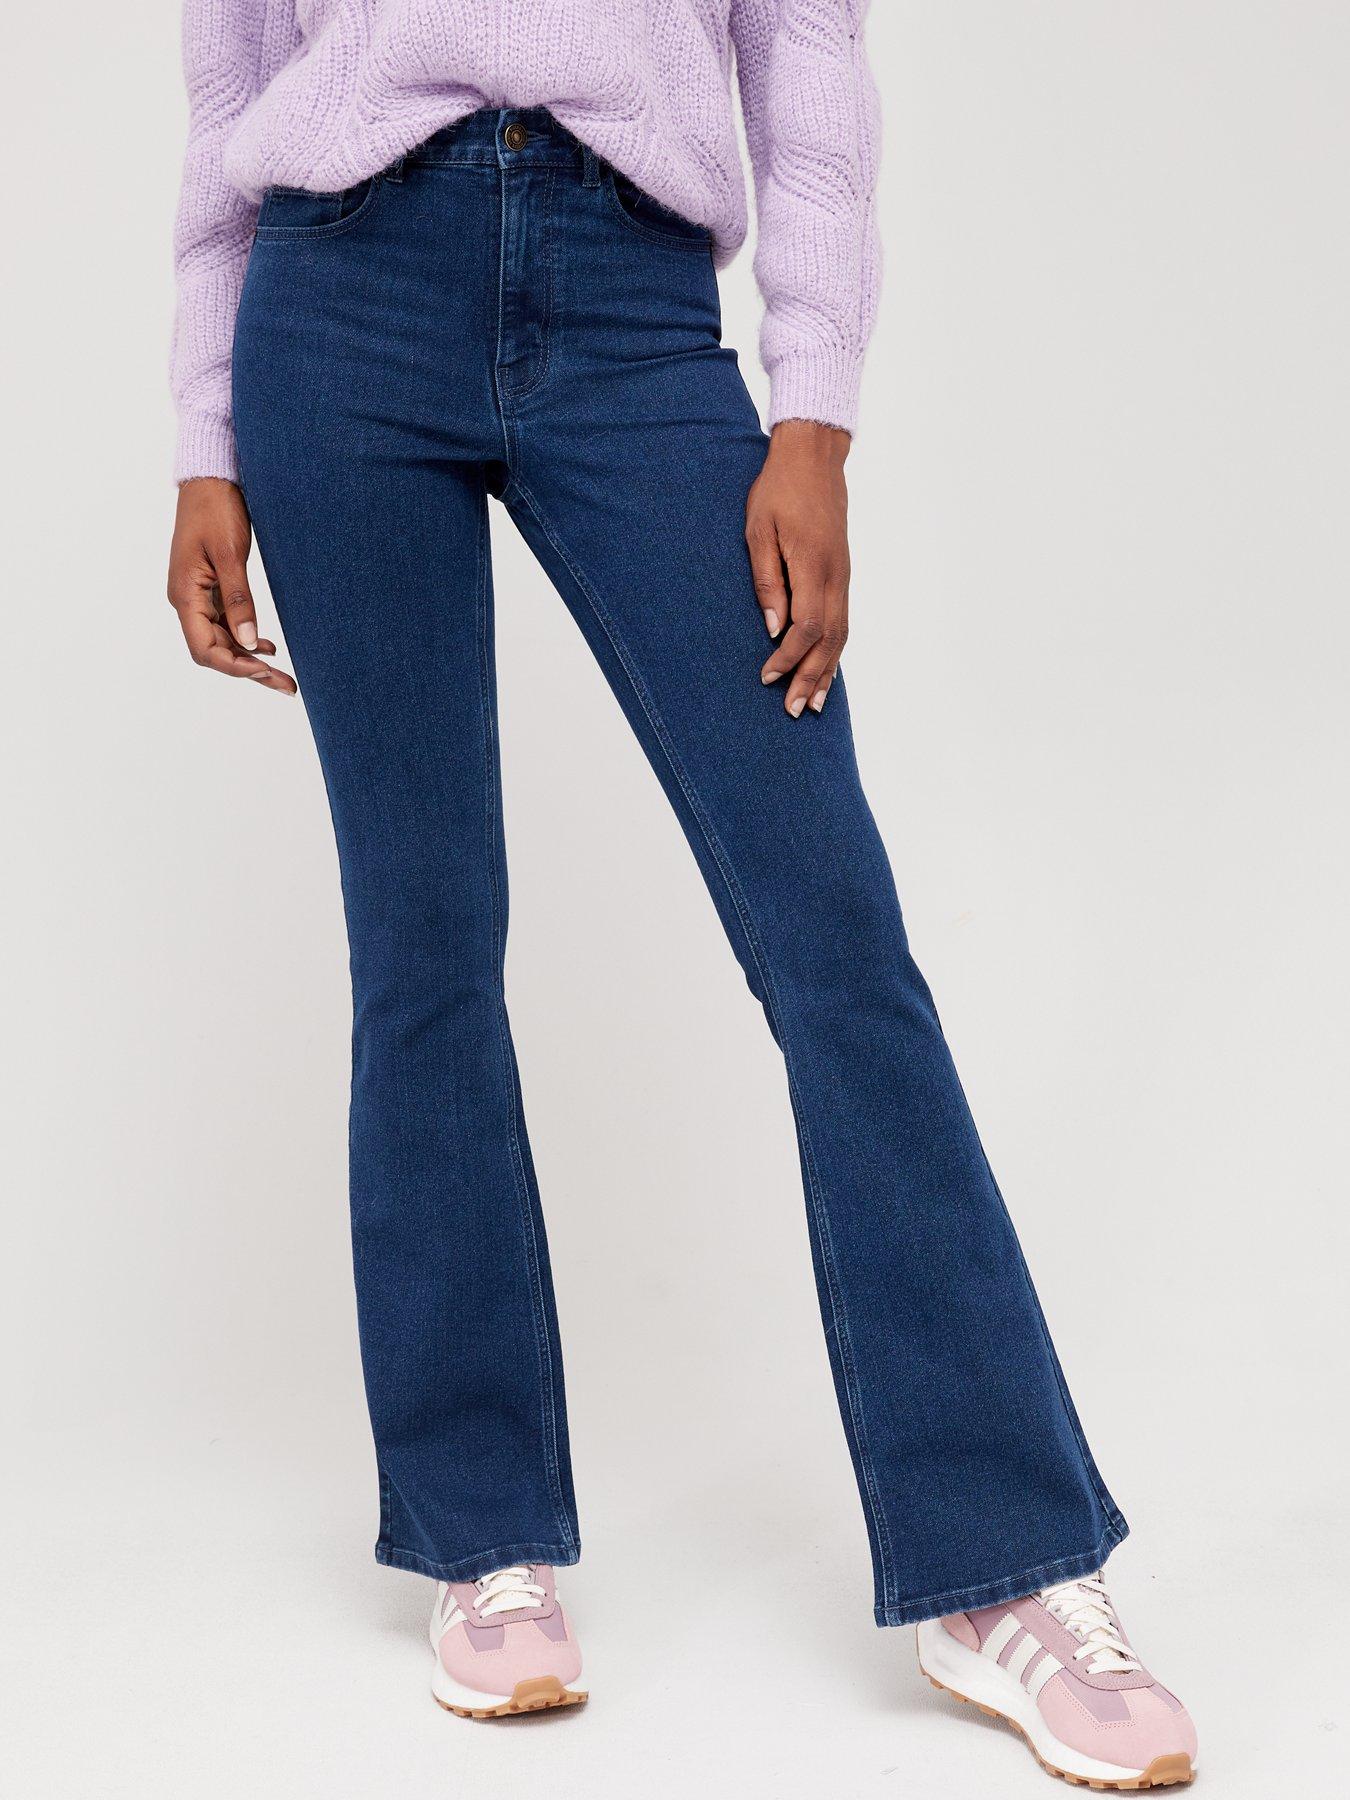 PIECES Peggy Flared High Waisted Jeans - Dark Blue very.co.uk